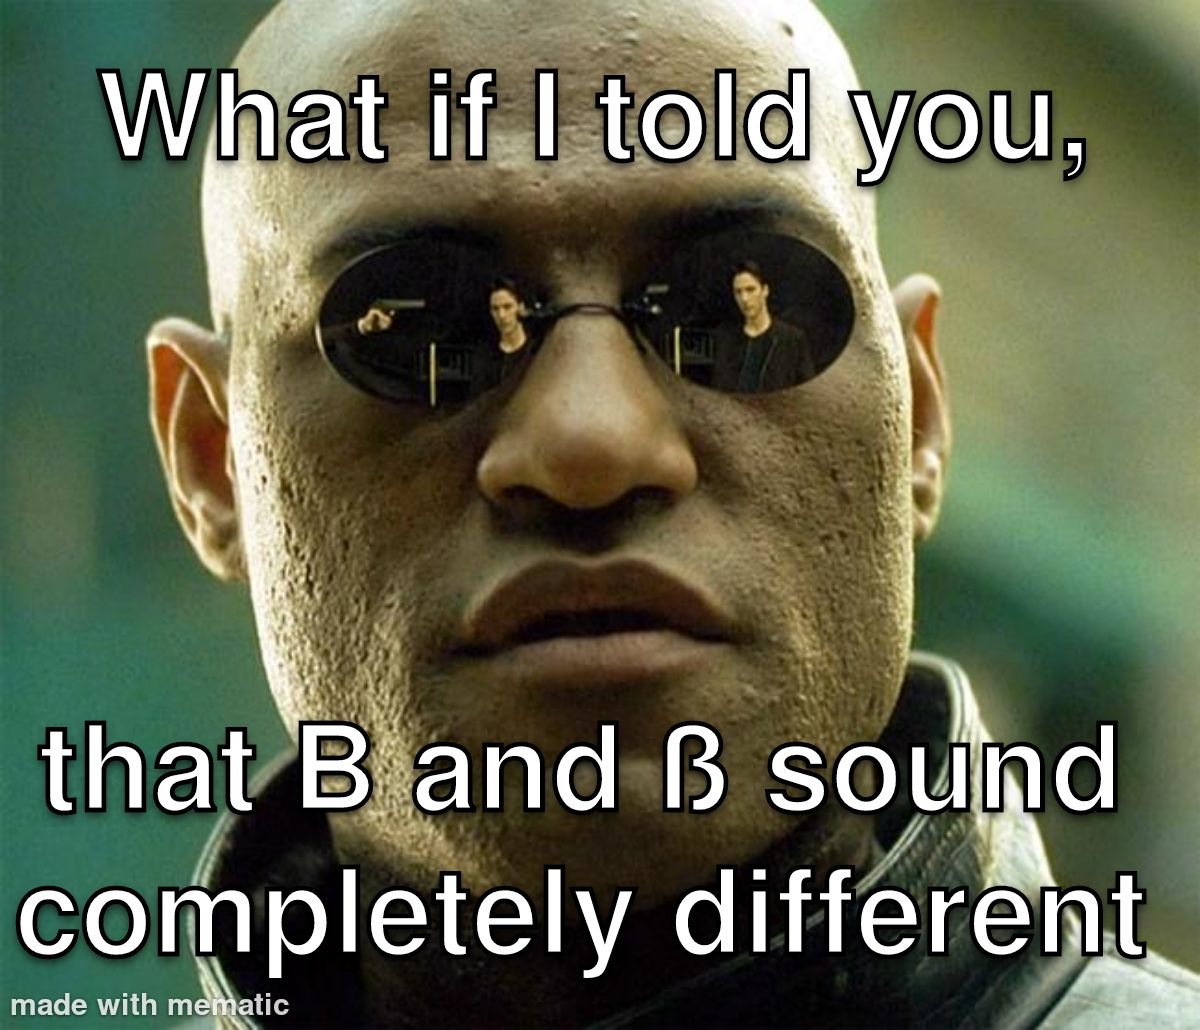 B and ß sound completely different